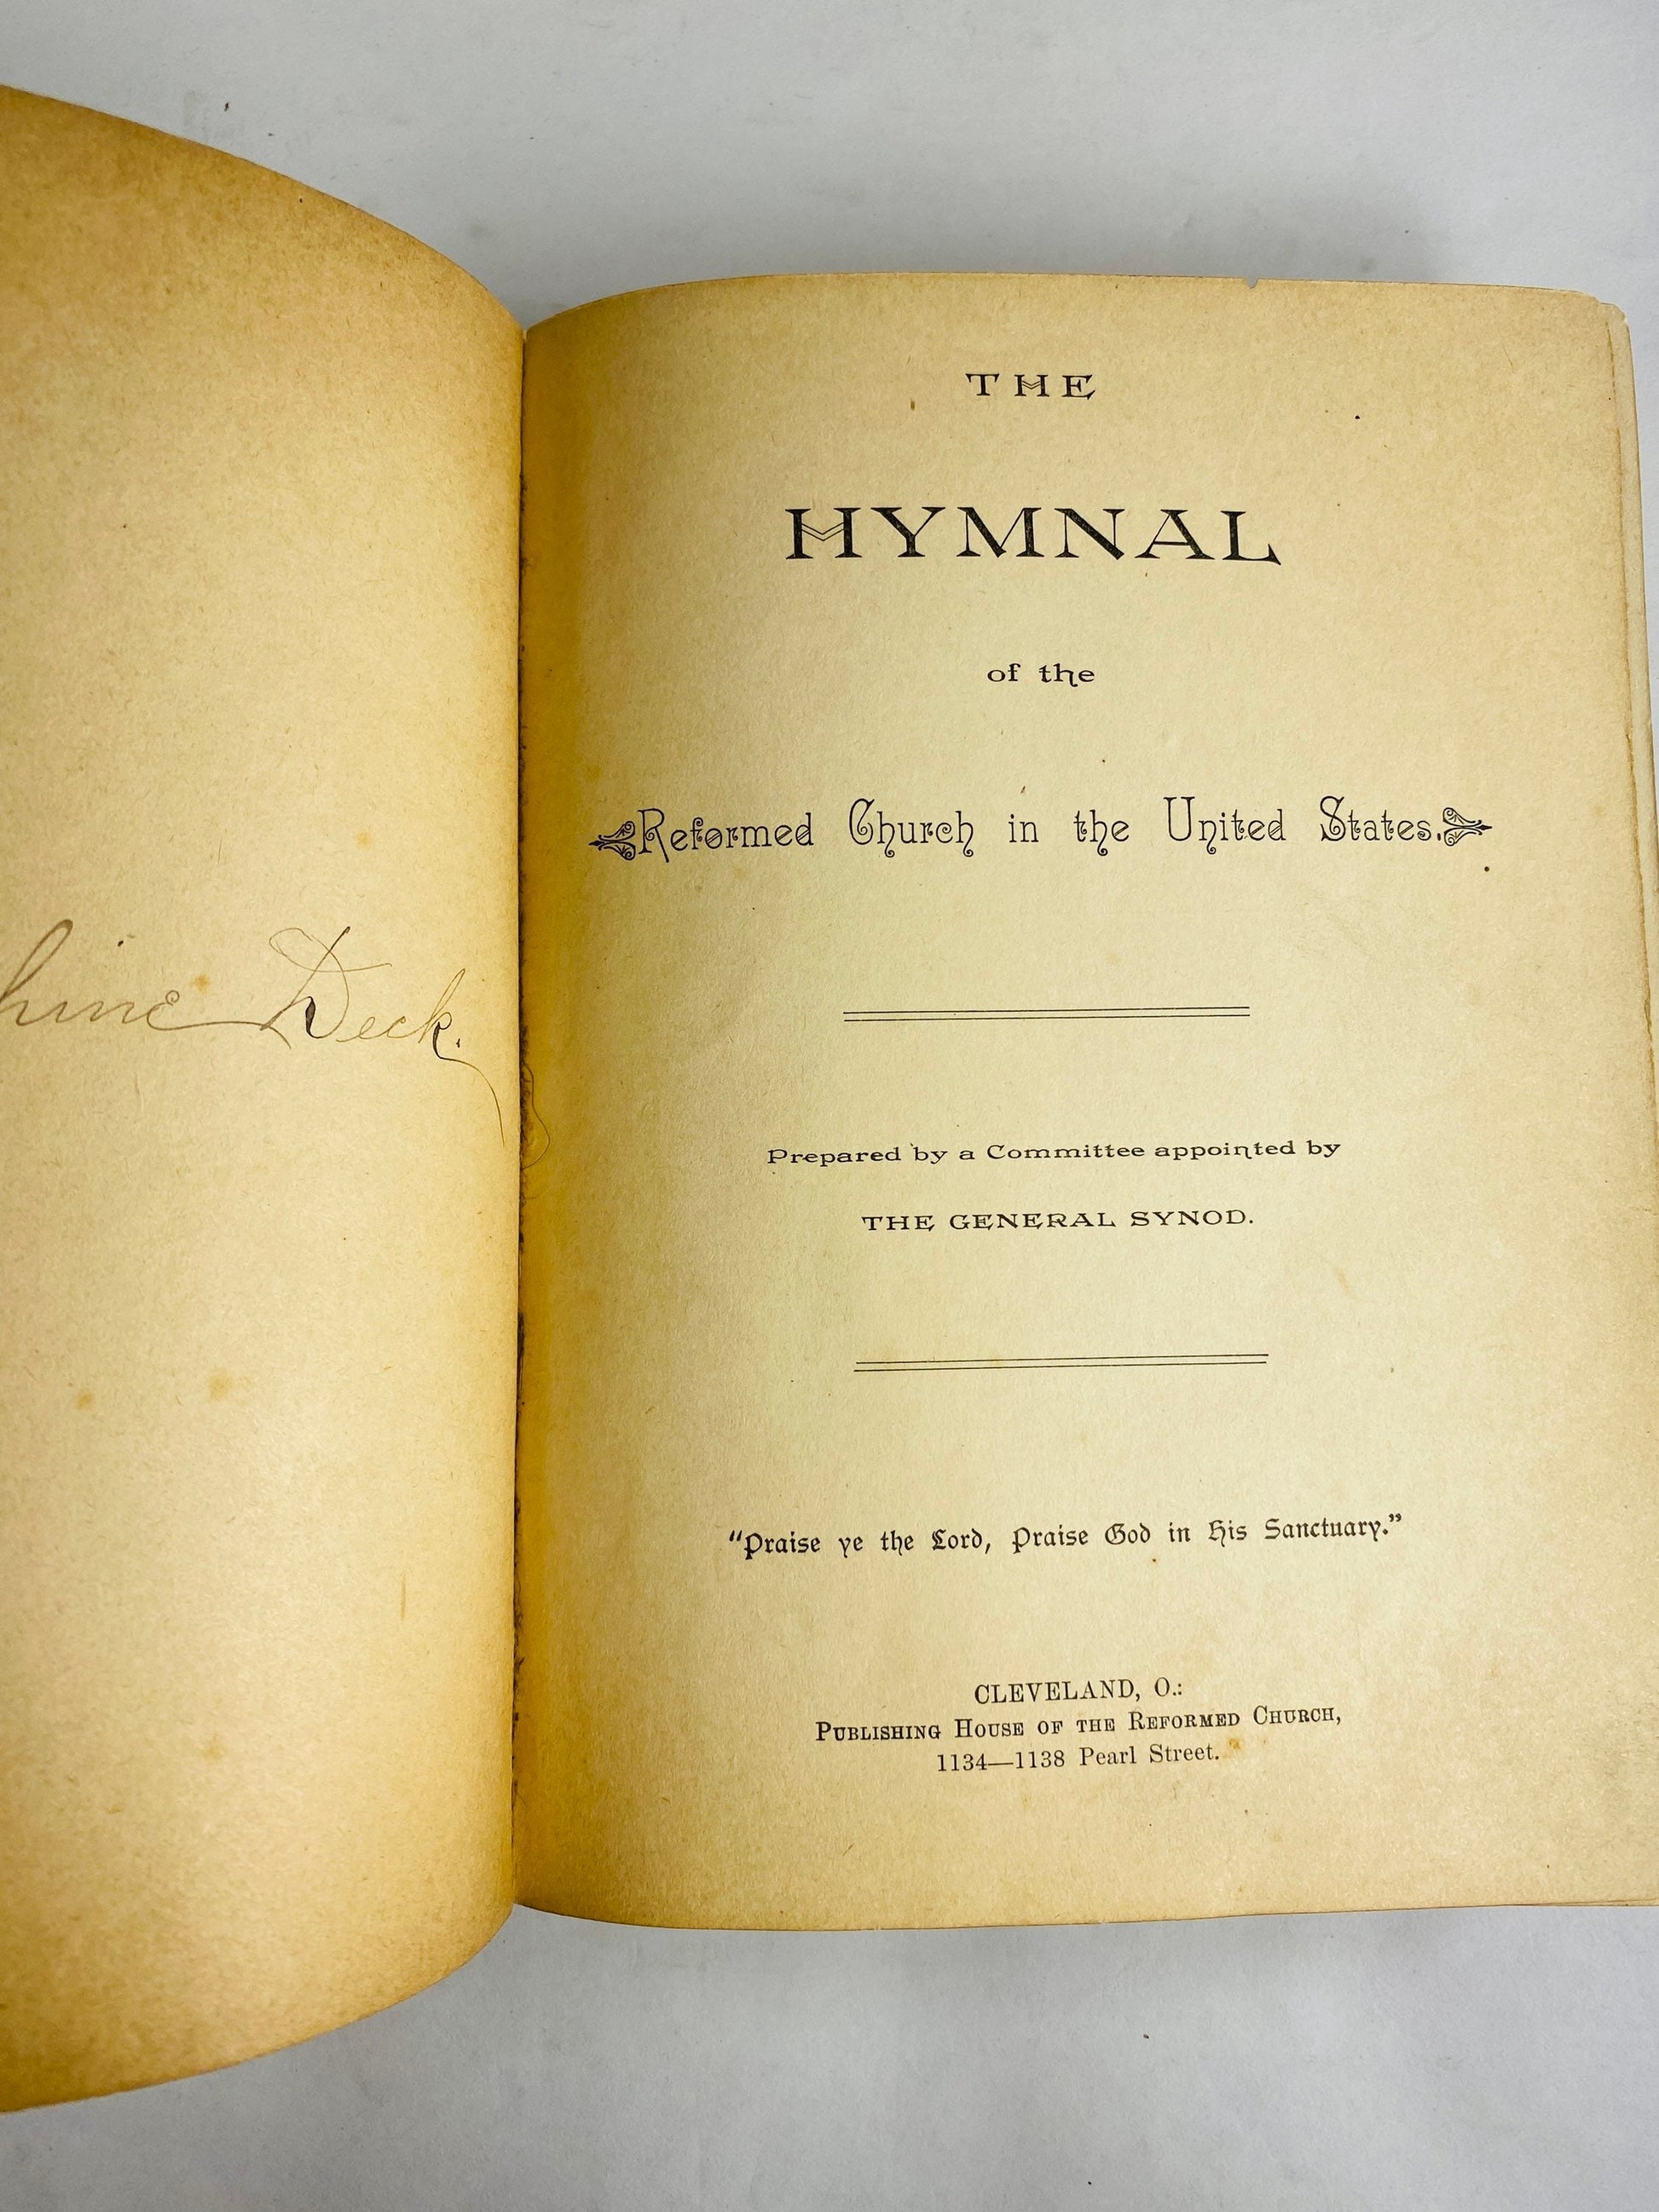 1890 Post Civil War Christianity vintage hymnal book Antique Reformed church Cleveland Ohio